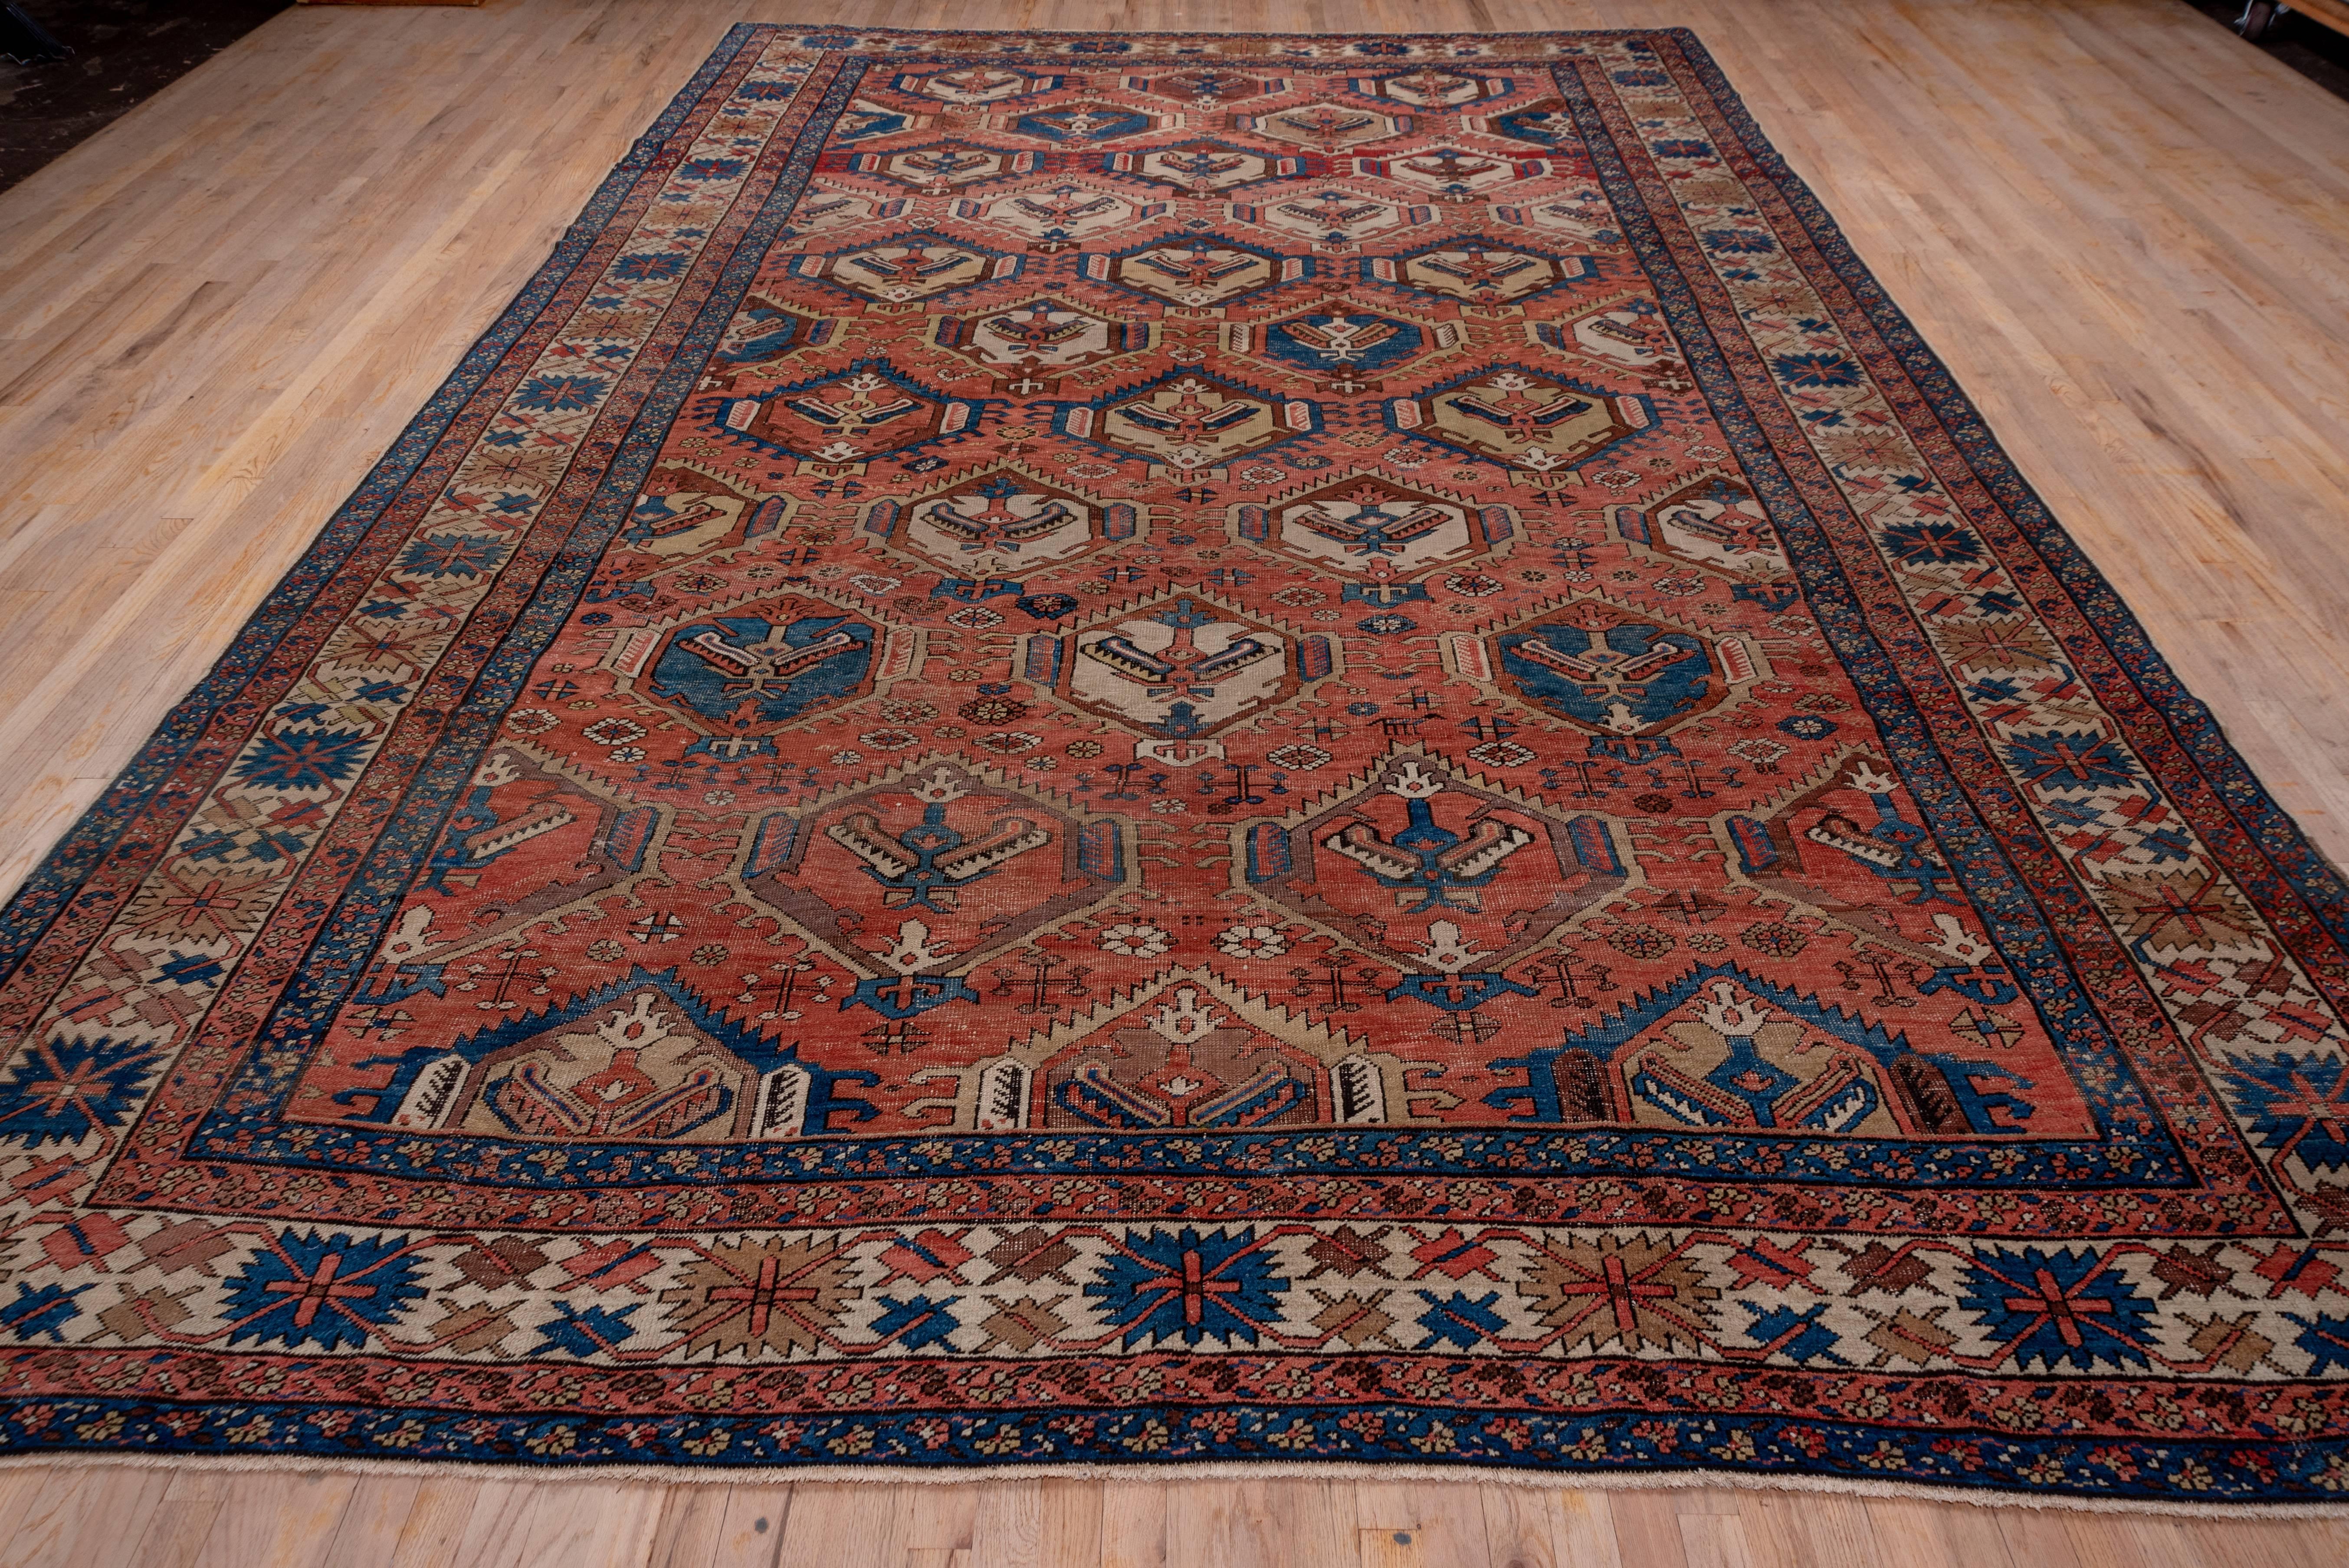 The Serapi grade is a better quality Heriz area carpet. This attractive example has a terracotta field displaying half drop rows of serrated Karaja-style hexagonal medallions in tones of medium-dark blue, yellow-camel, ivory and dark brown. The